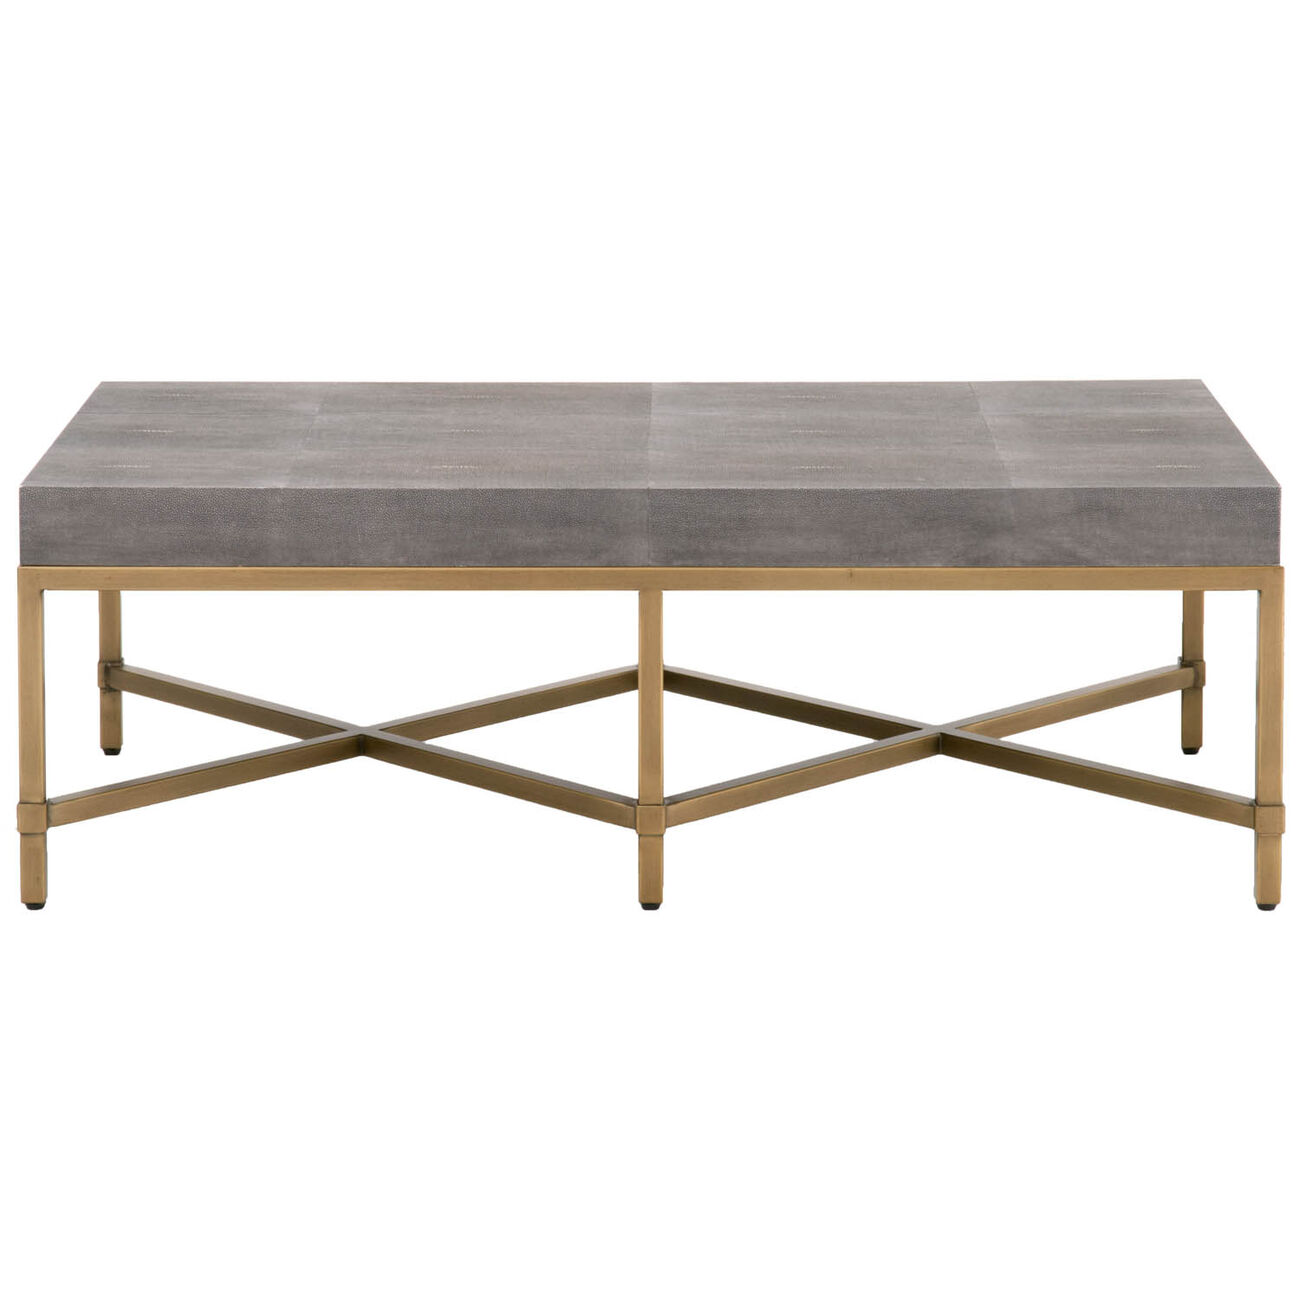 Resin Top Rectangular Coffee Table With Metal Base, Gray And Gold